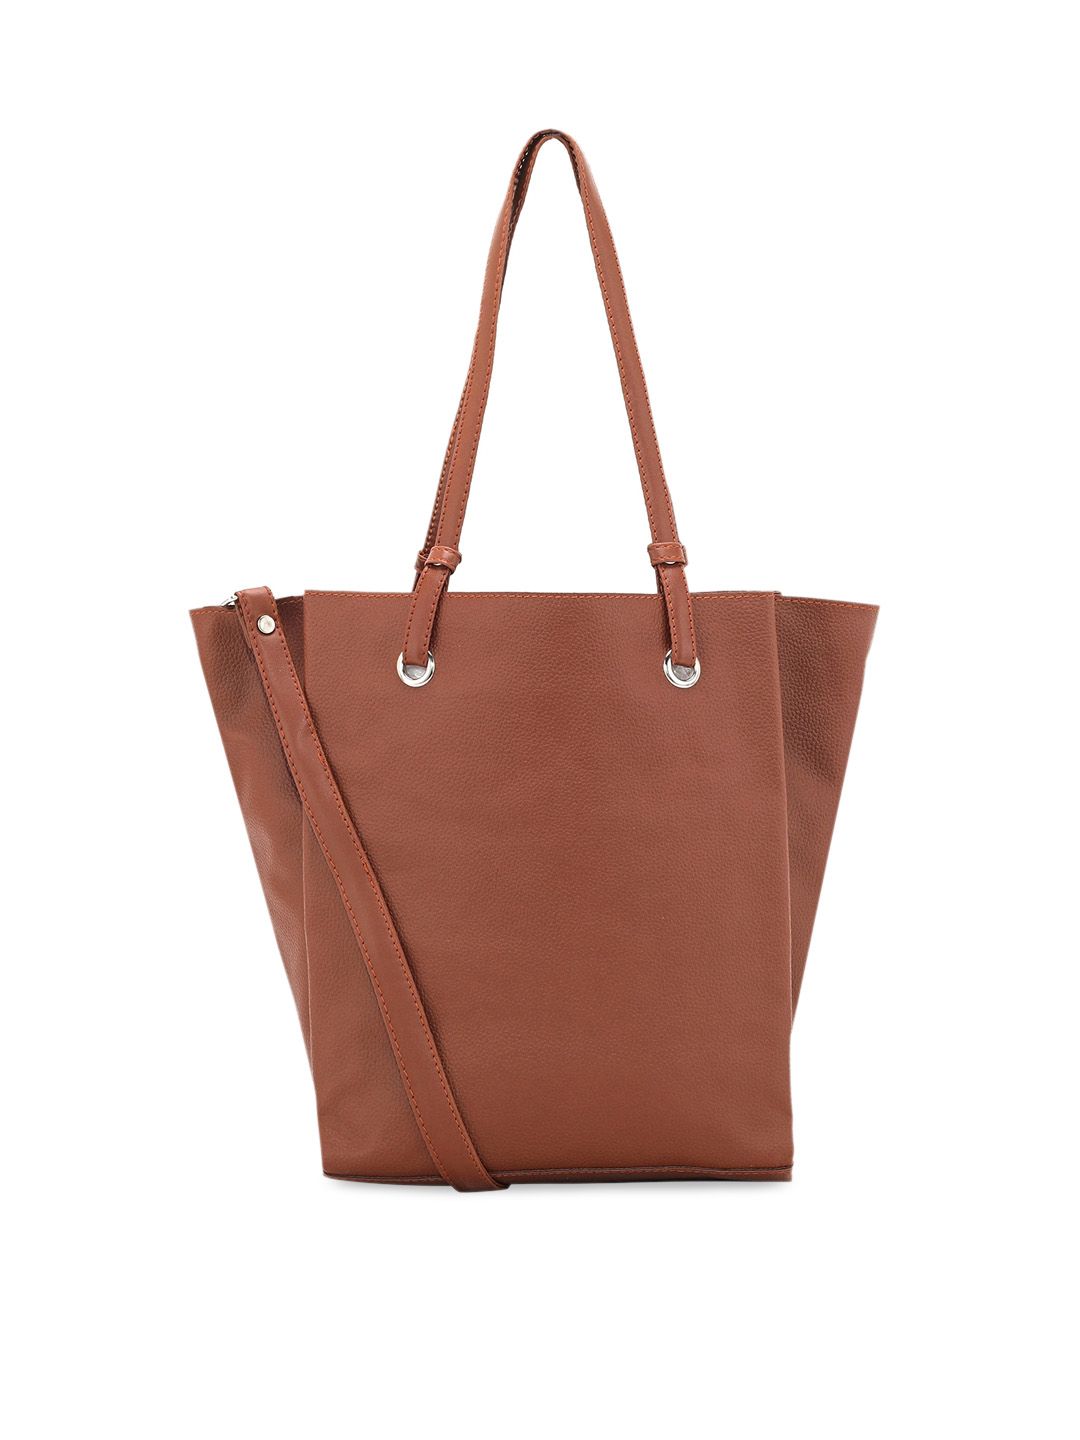 Toteteca Brown PU Oversized Structured Shoulder Bag Price in India